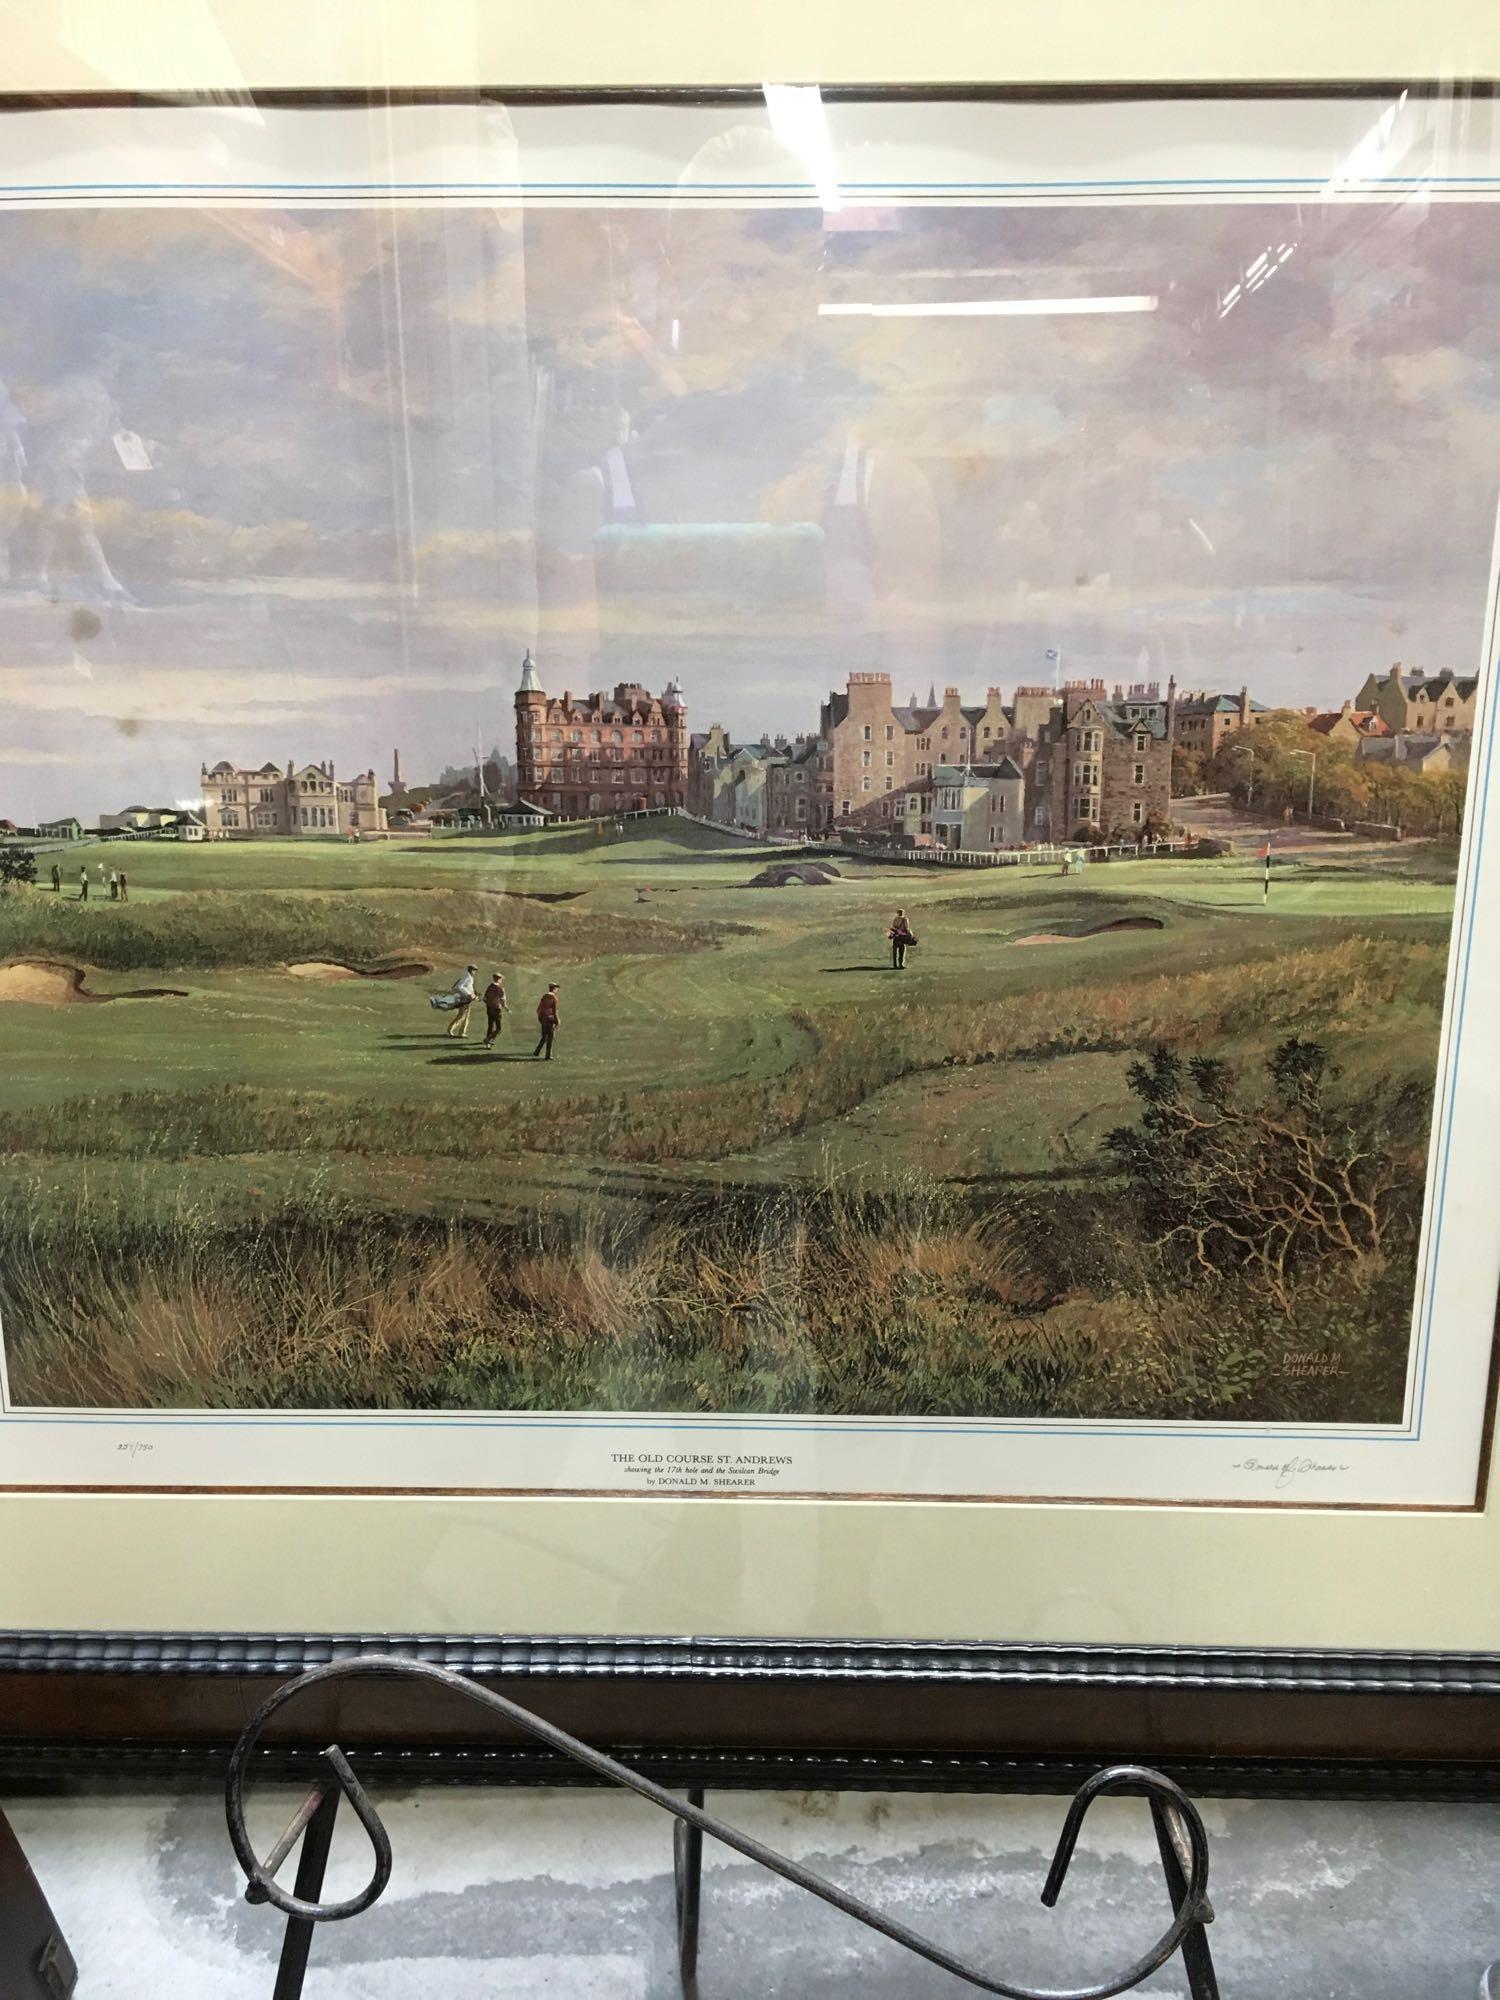 The Old Course St. Andrews, 17th Hole and the Swilcan Bridge, by Donald M. Shearer